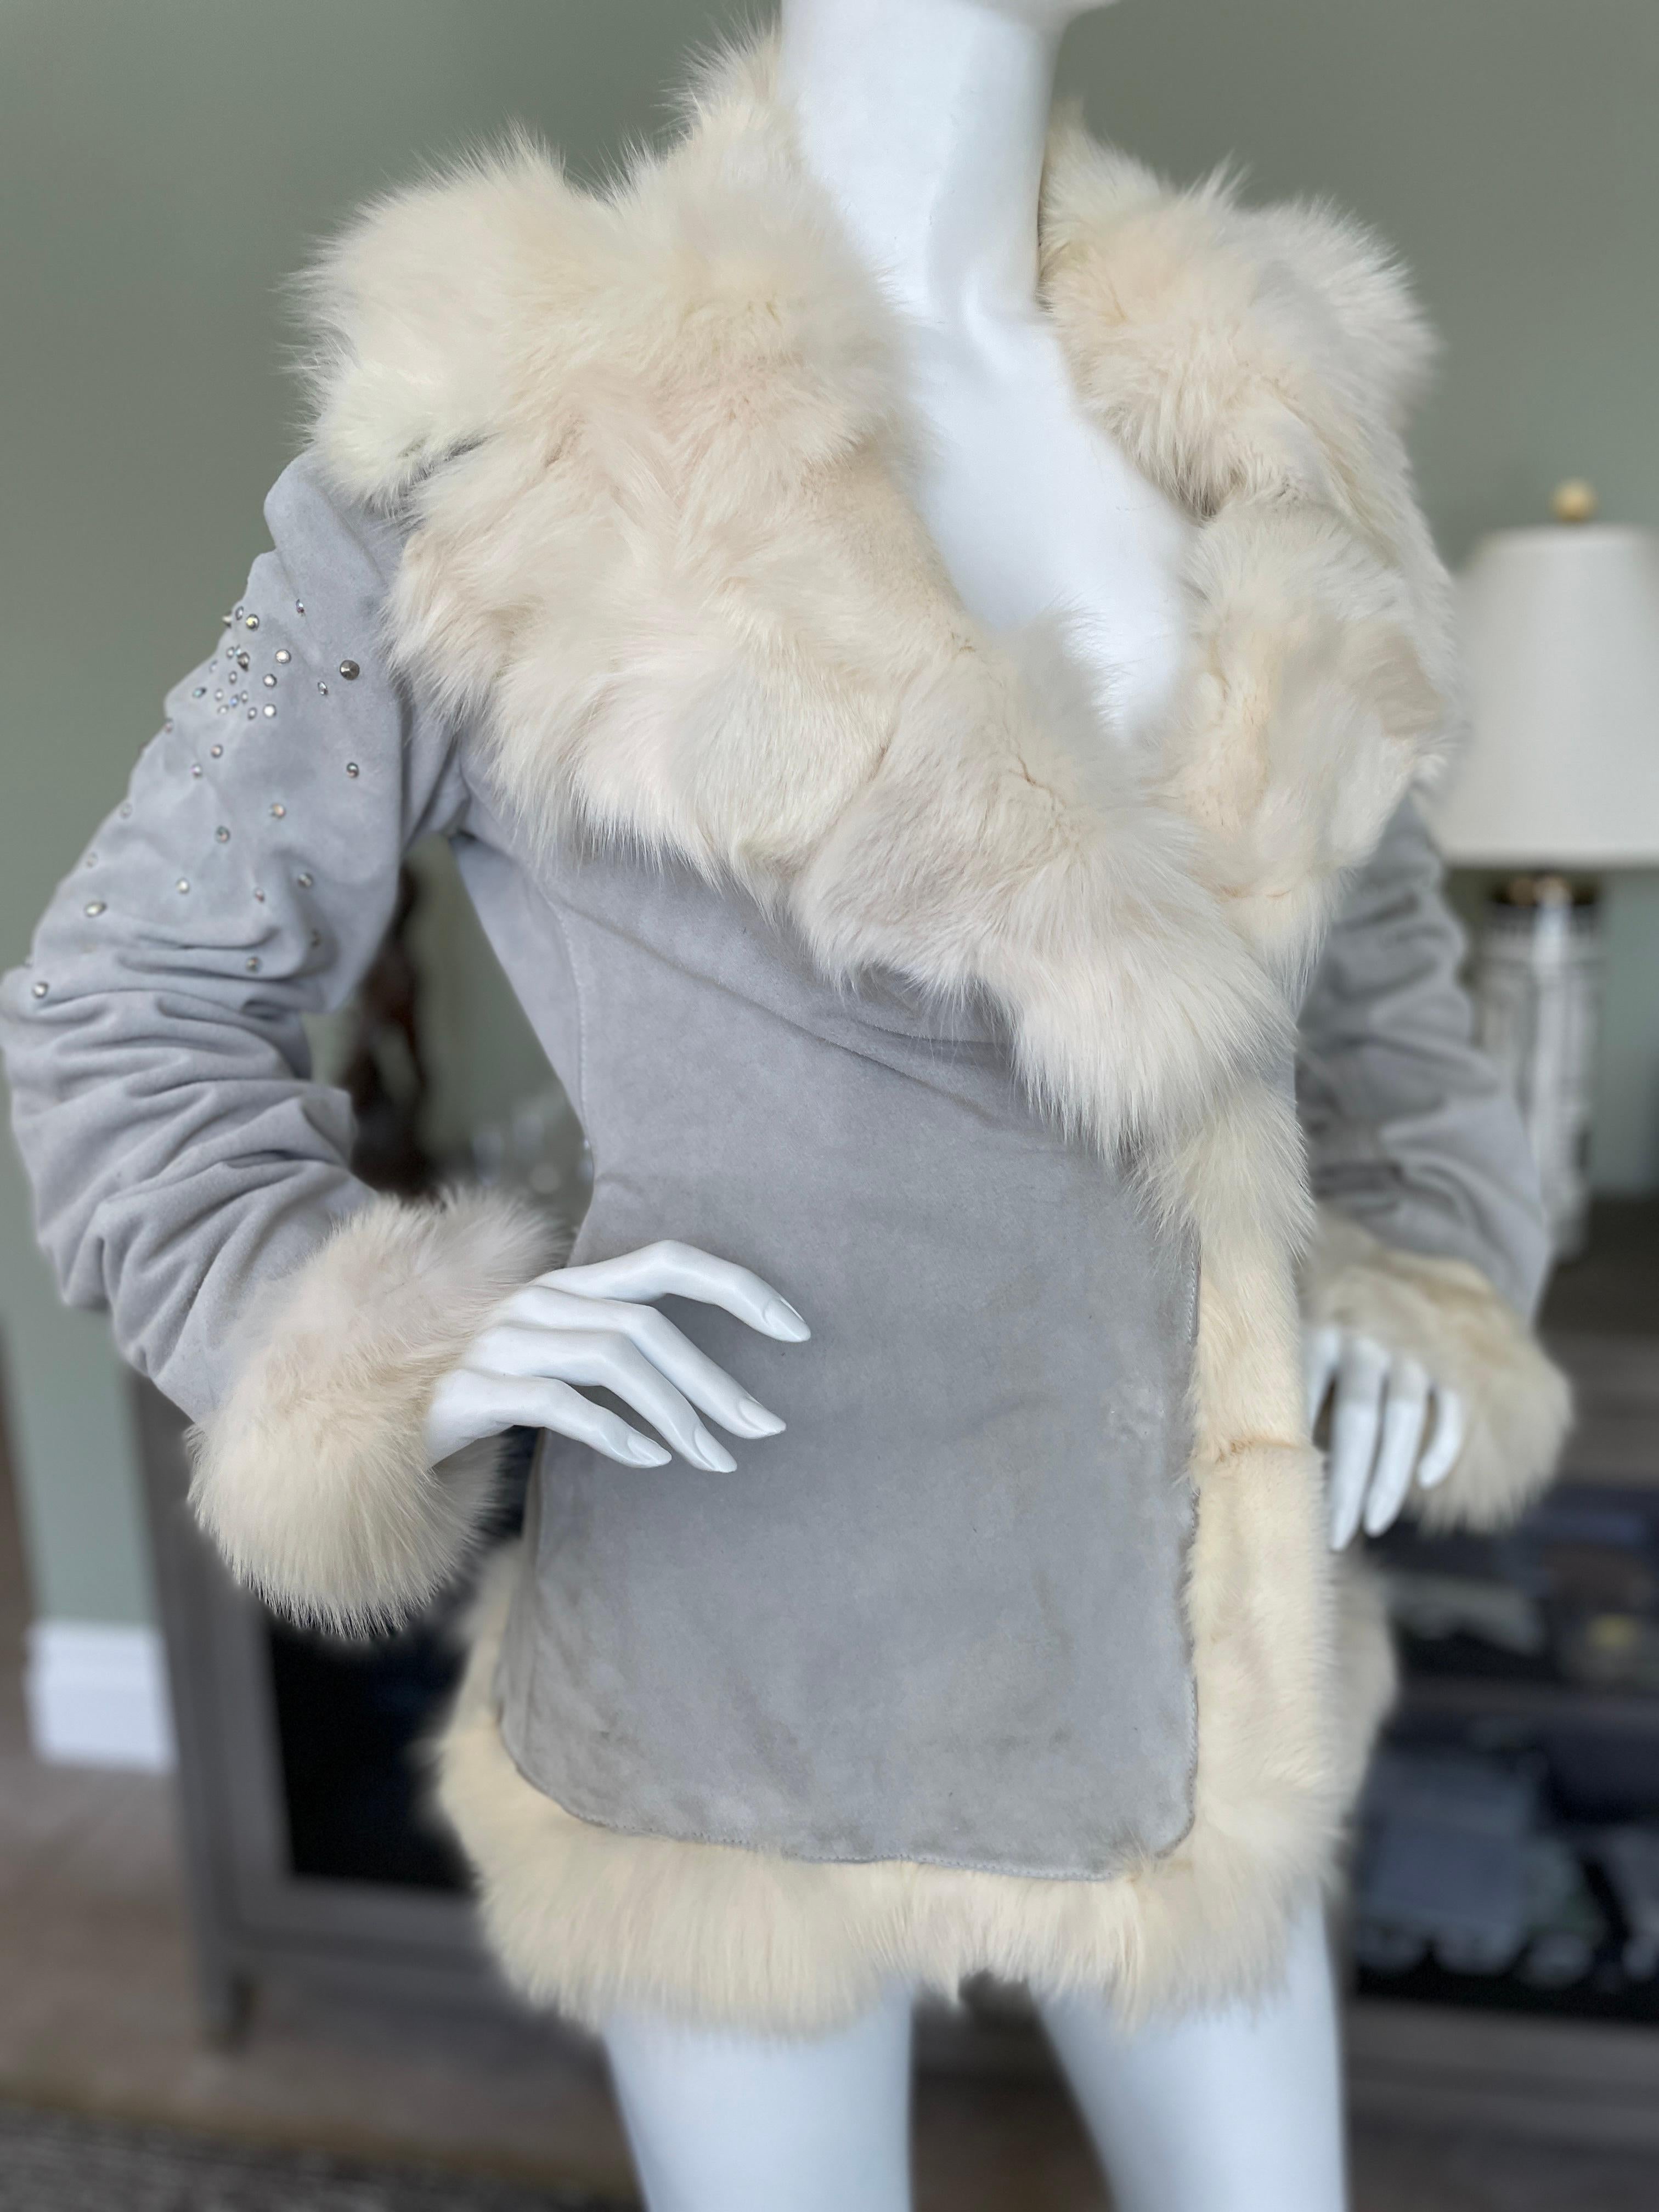 Thierry Mugler Vintage Suede Jacket with Fox Fur And Crystal Trim.
Pale blue suede with crystal accents on sleeves and fox fur trim.
Size 44
